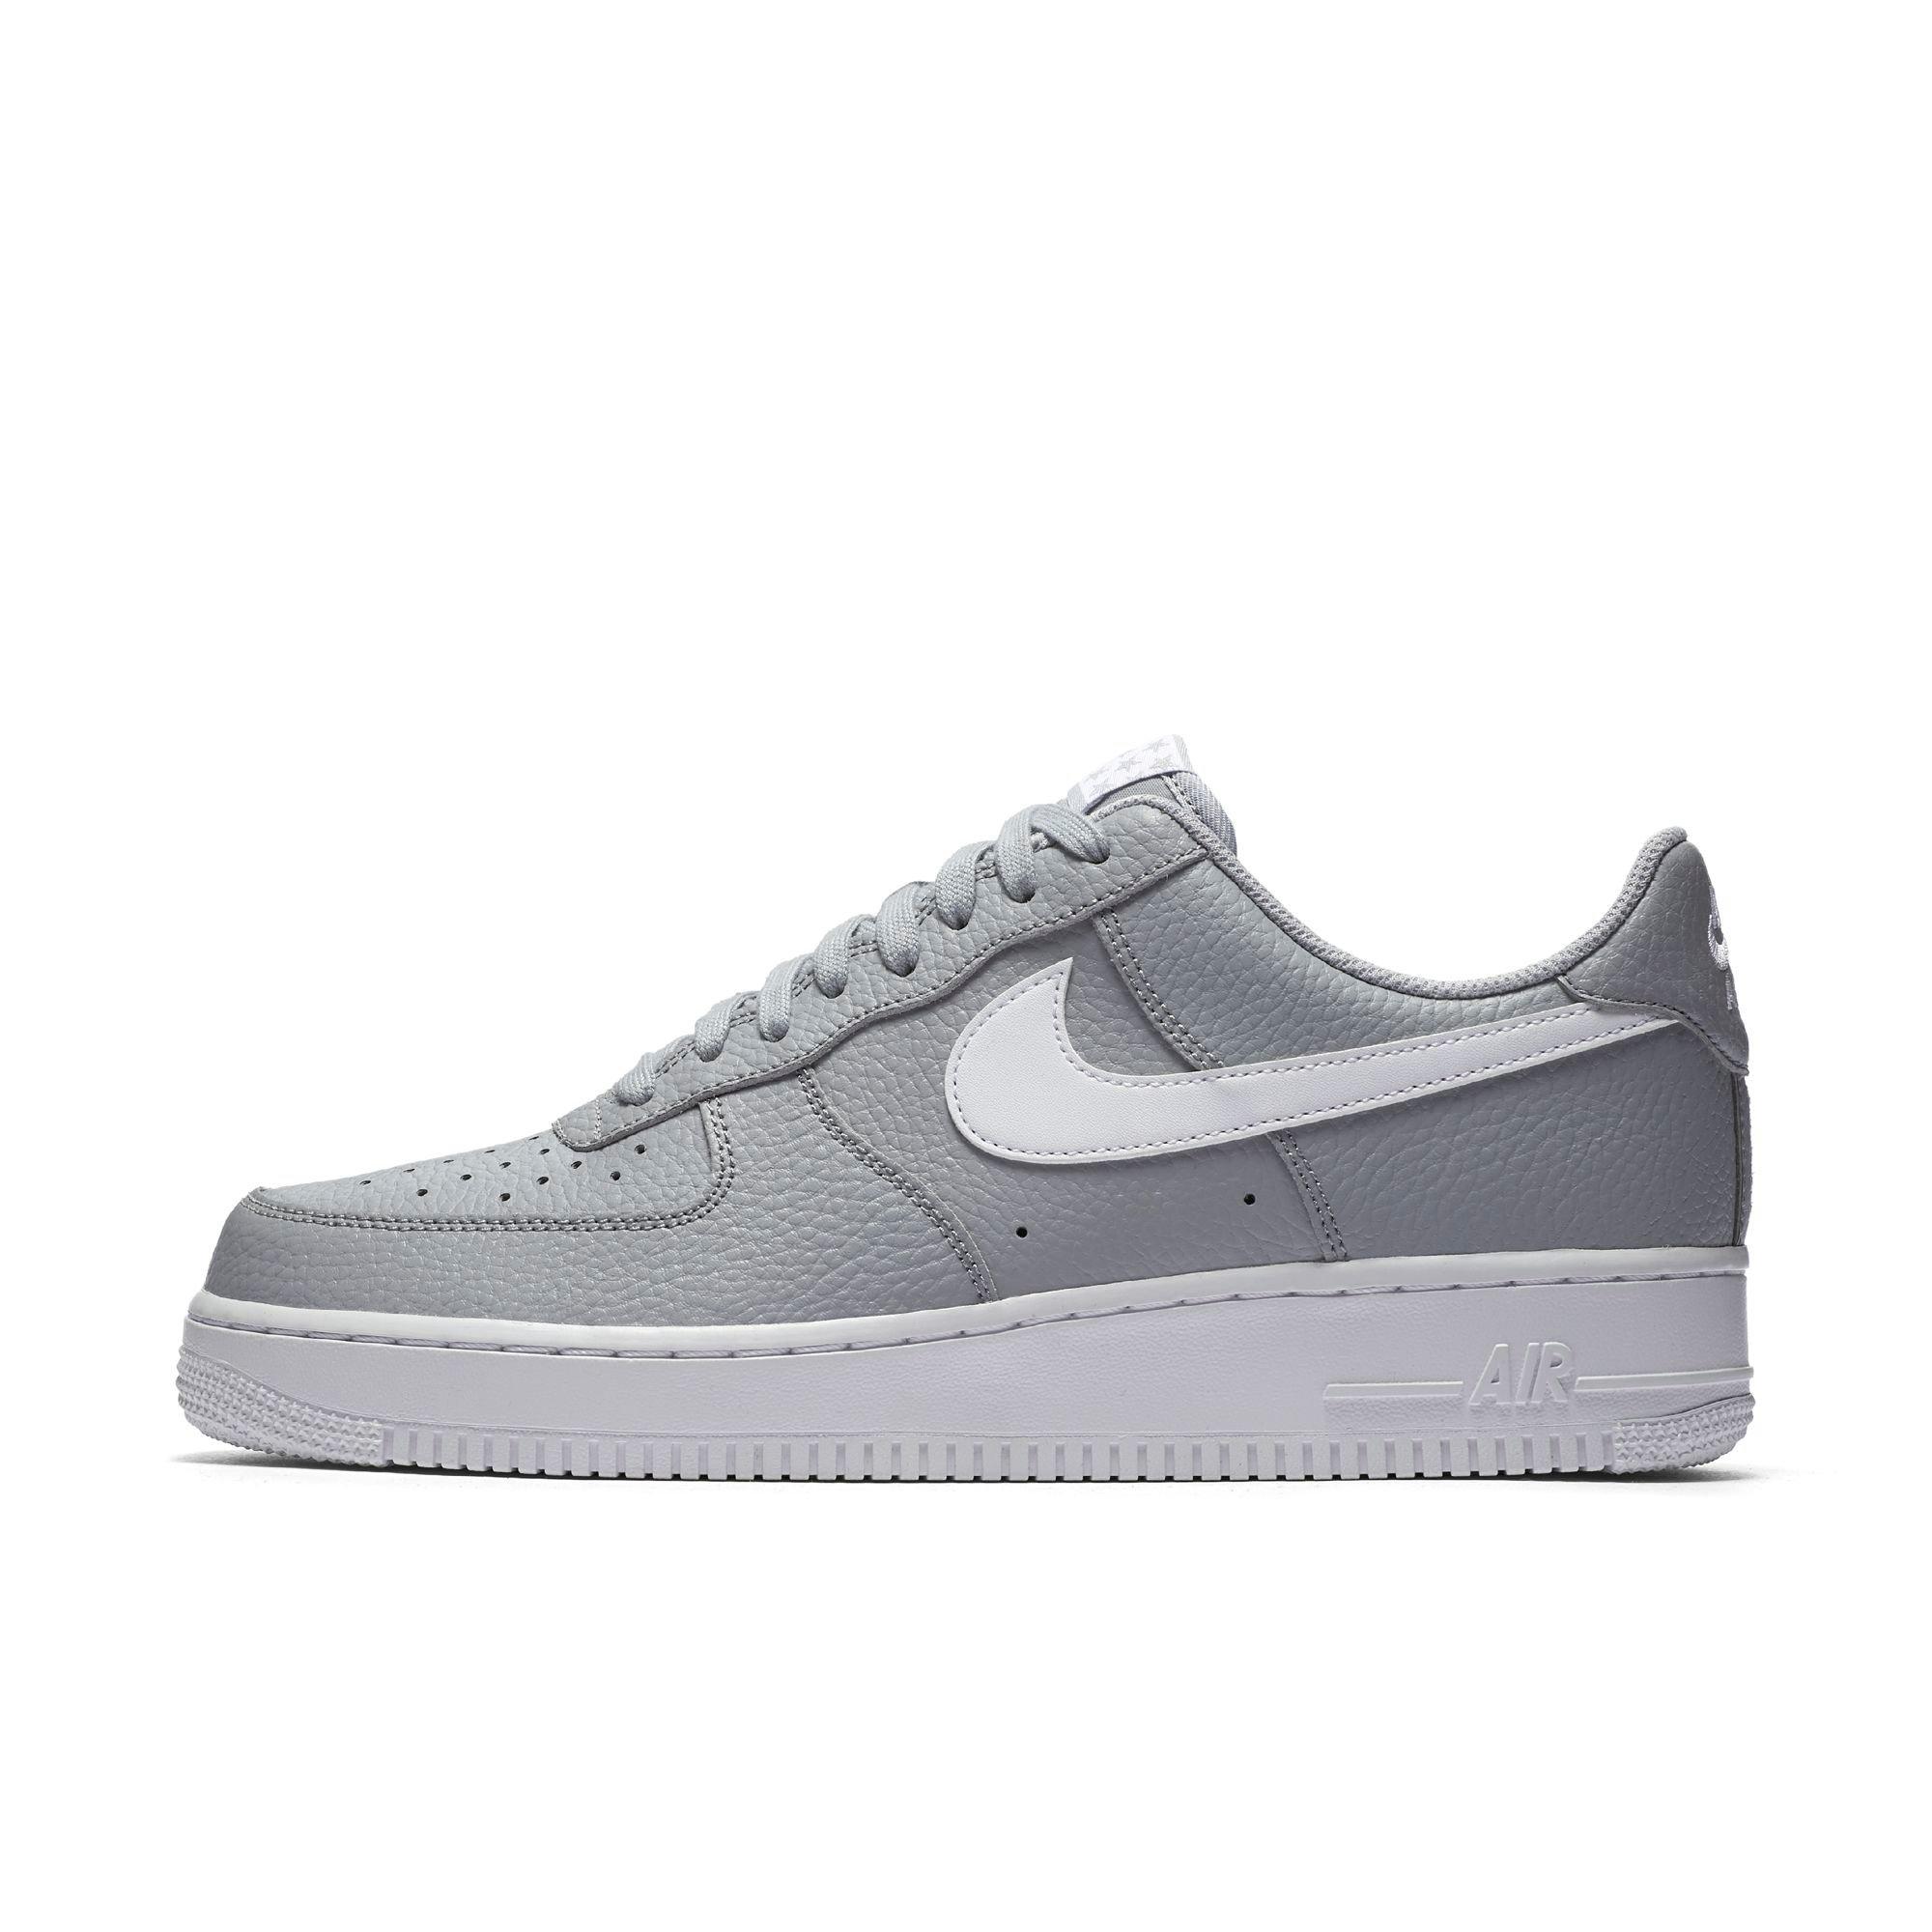 grey airforce 1s